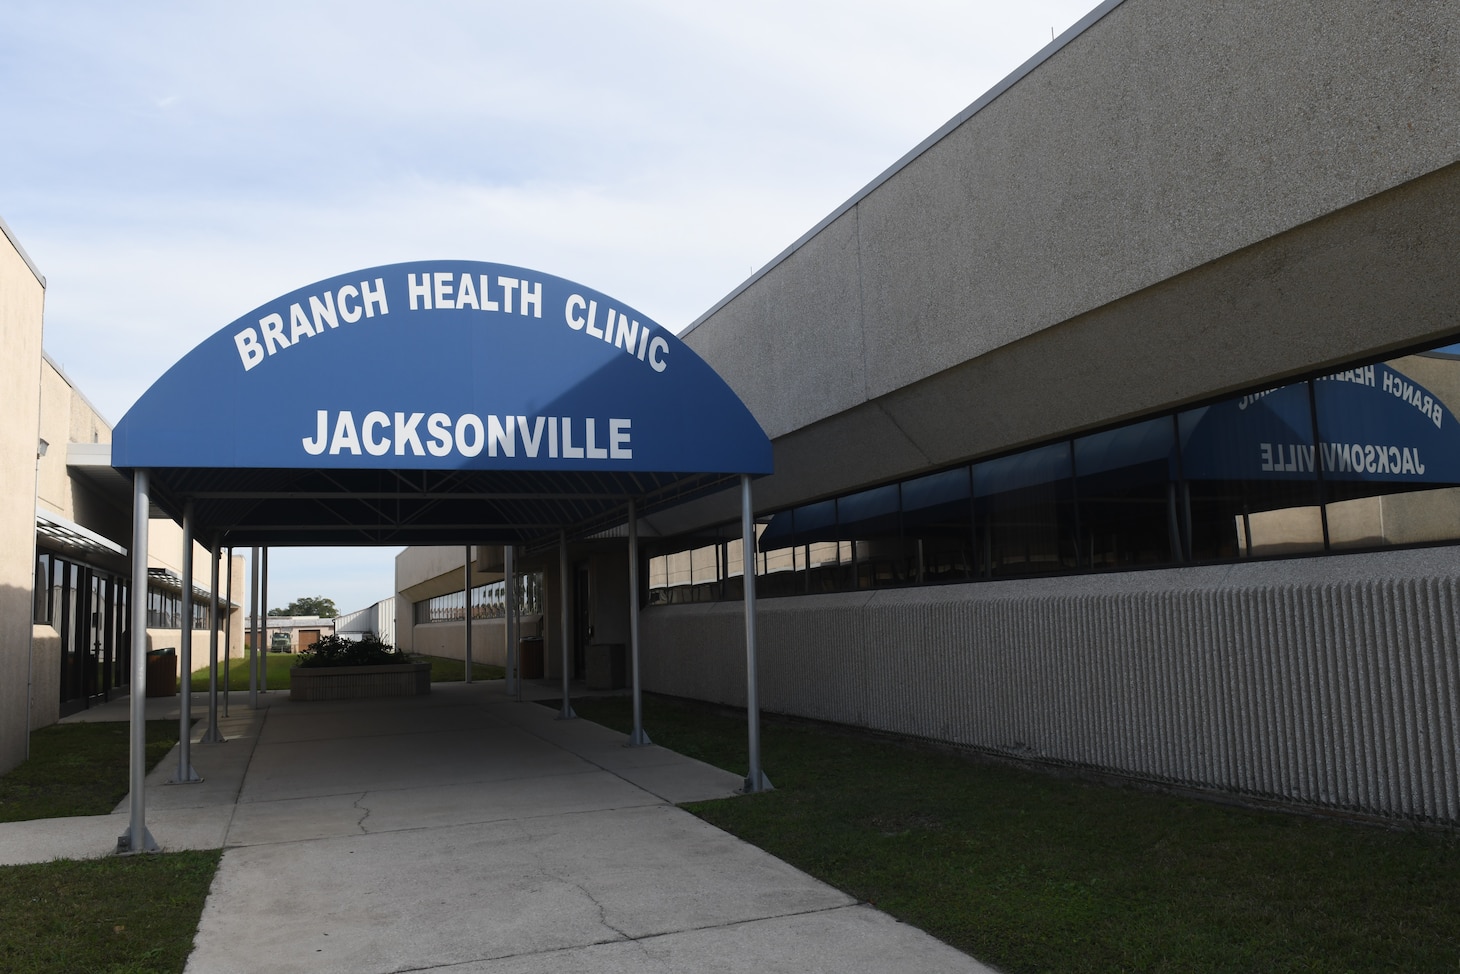 The Exceptional Family Member Program (EFMP) coordinators are located at Naval Branch Health Clinic Jacksonville.